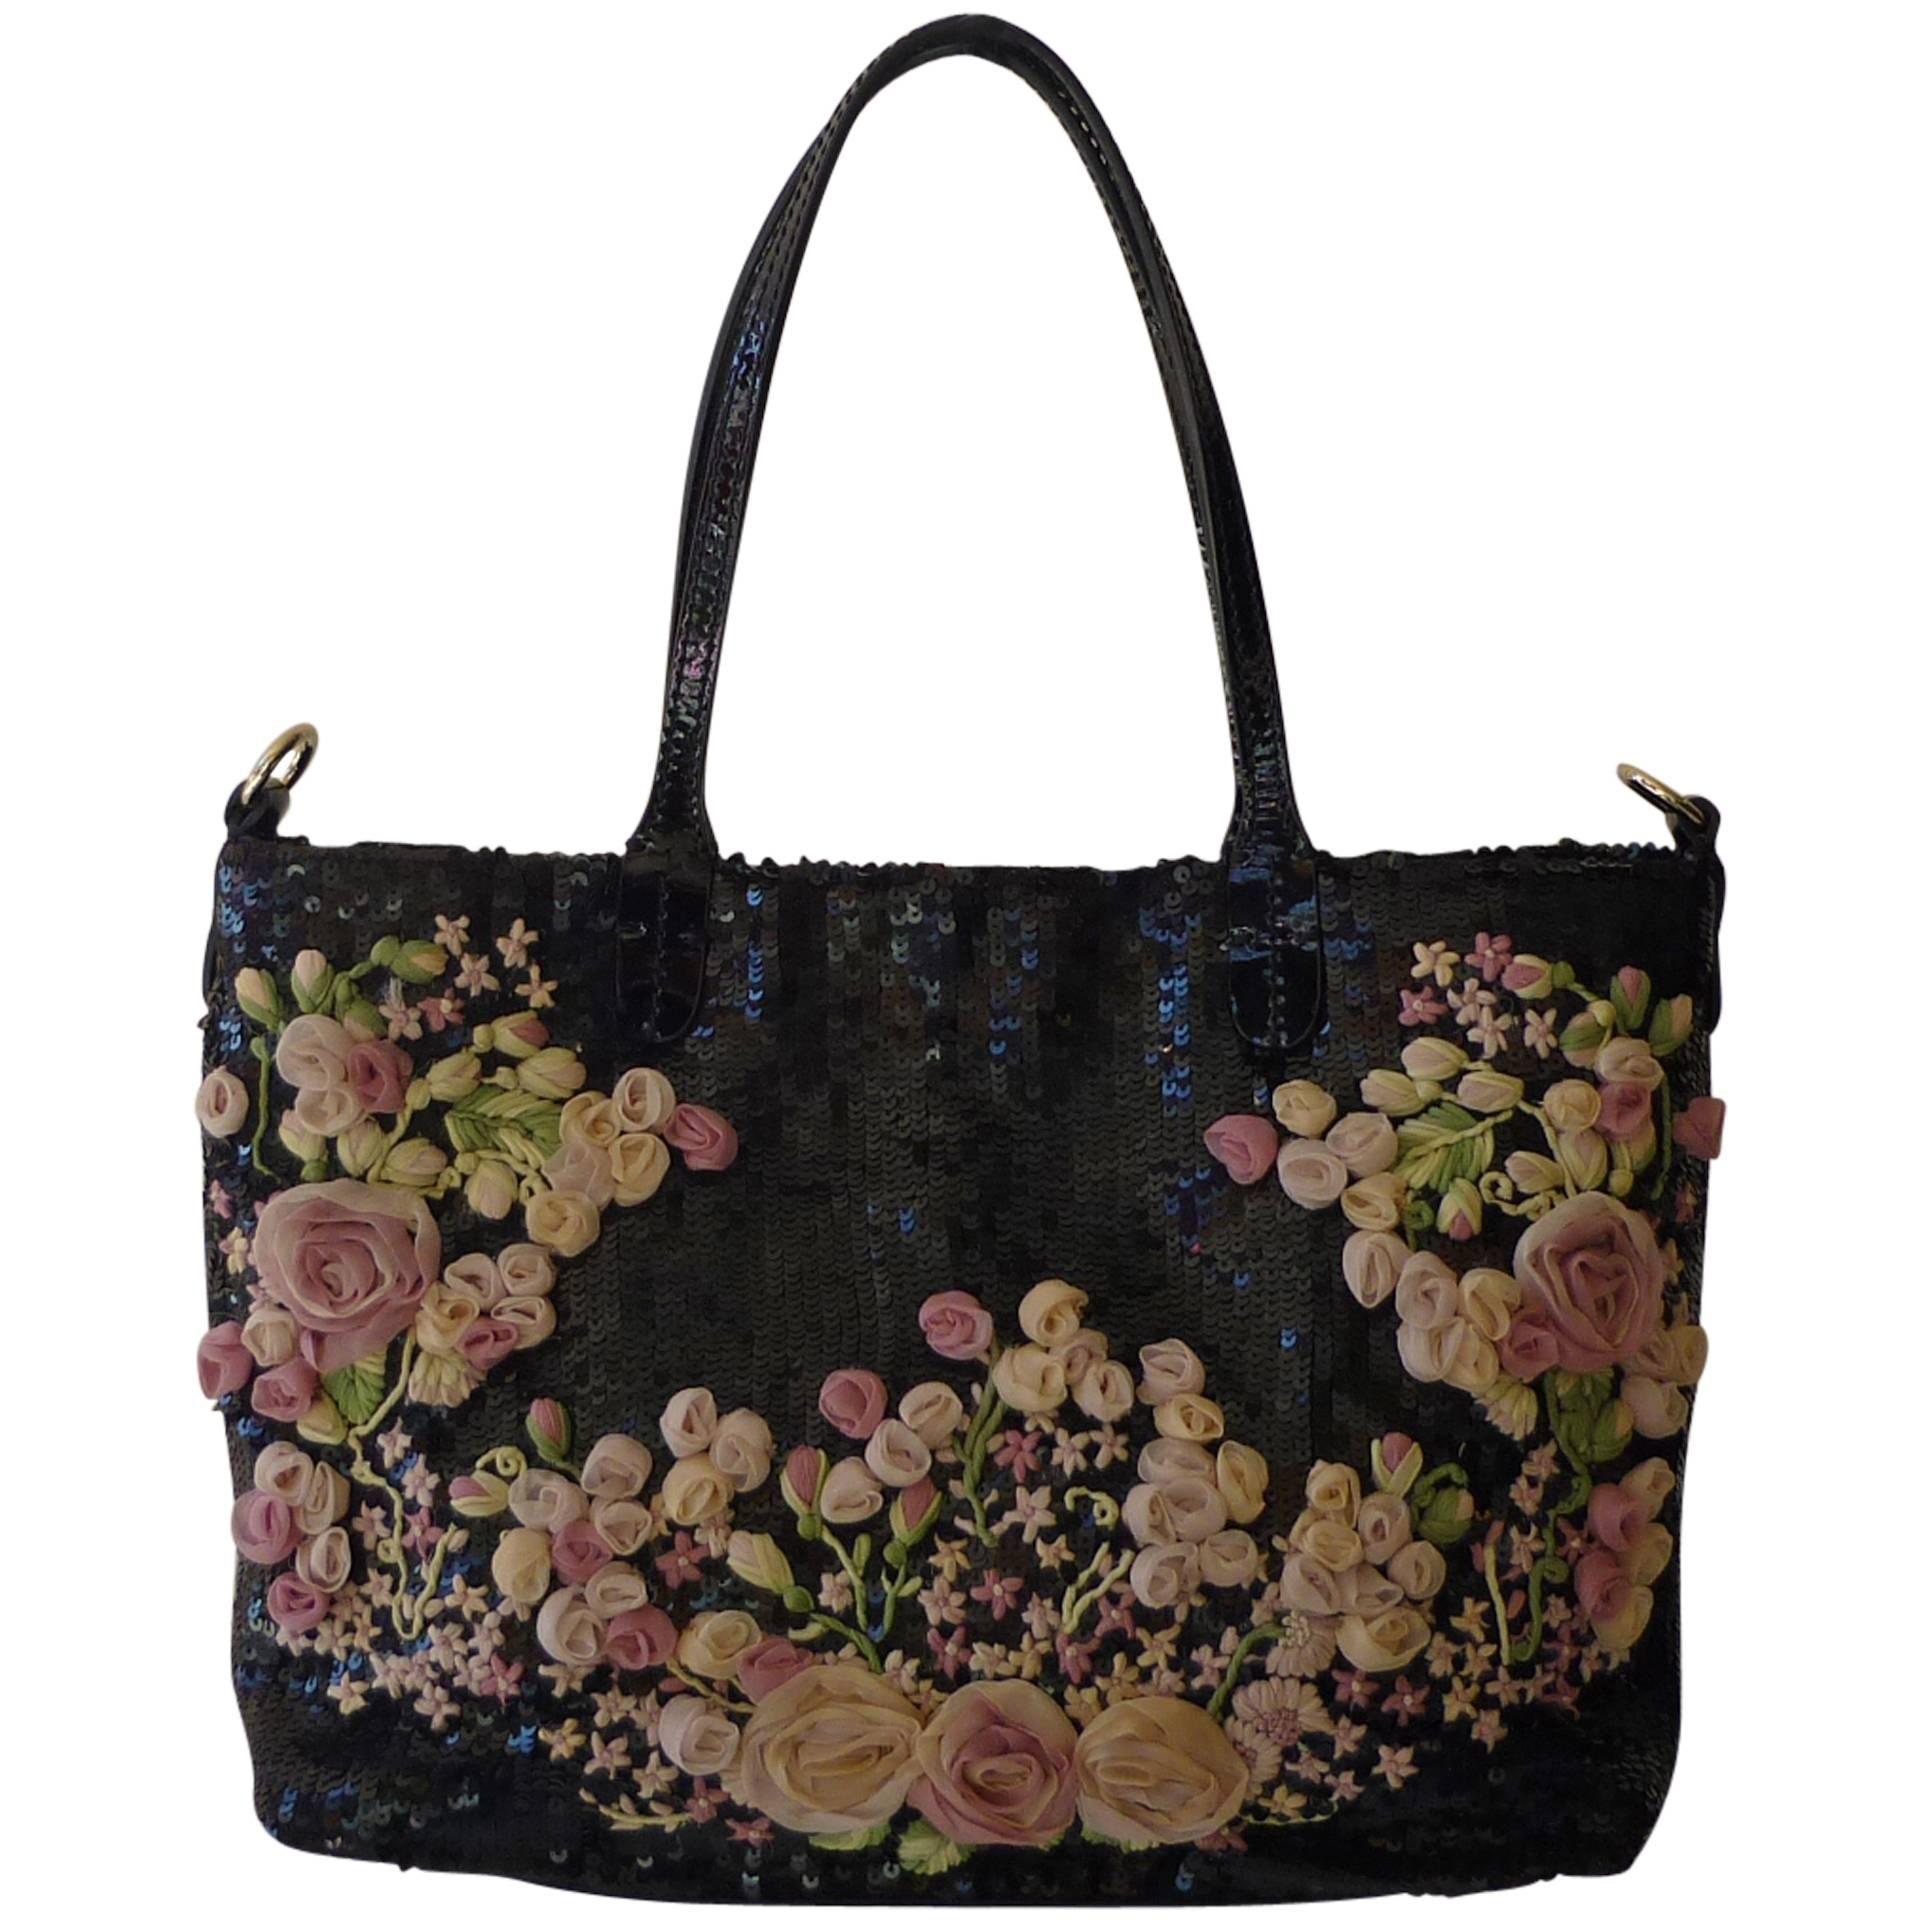 Valentino Floral Sequin Tote Bag w/Dust Bag